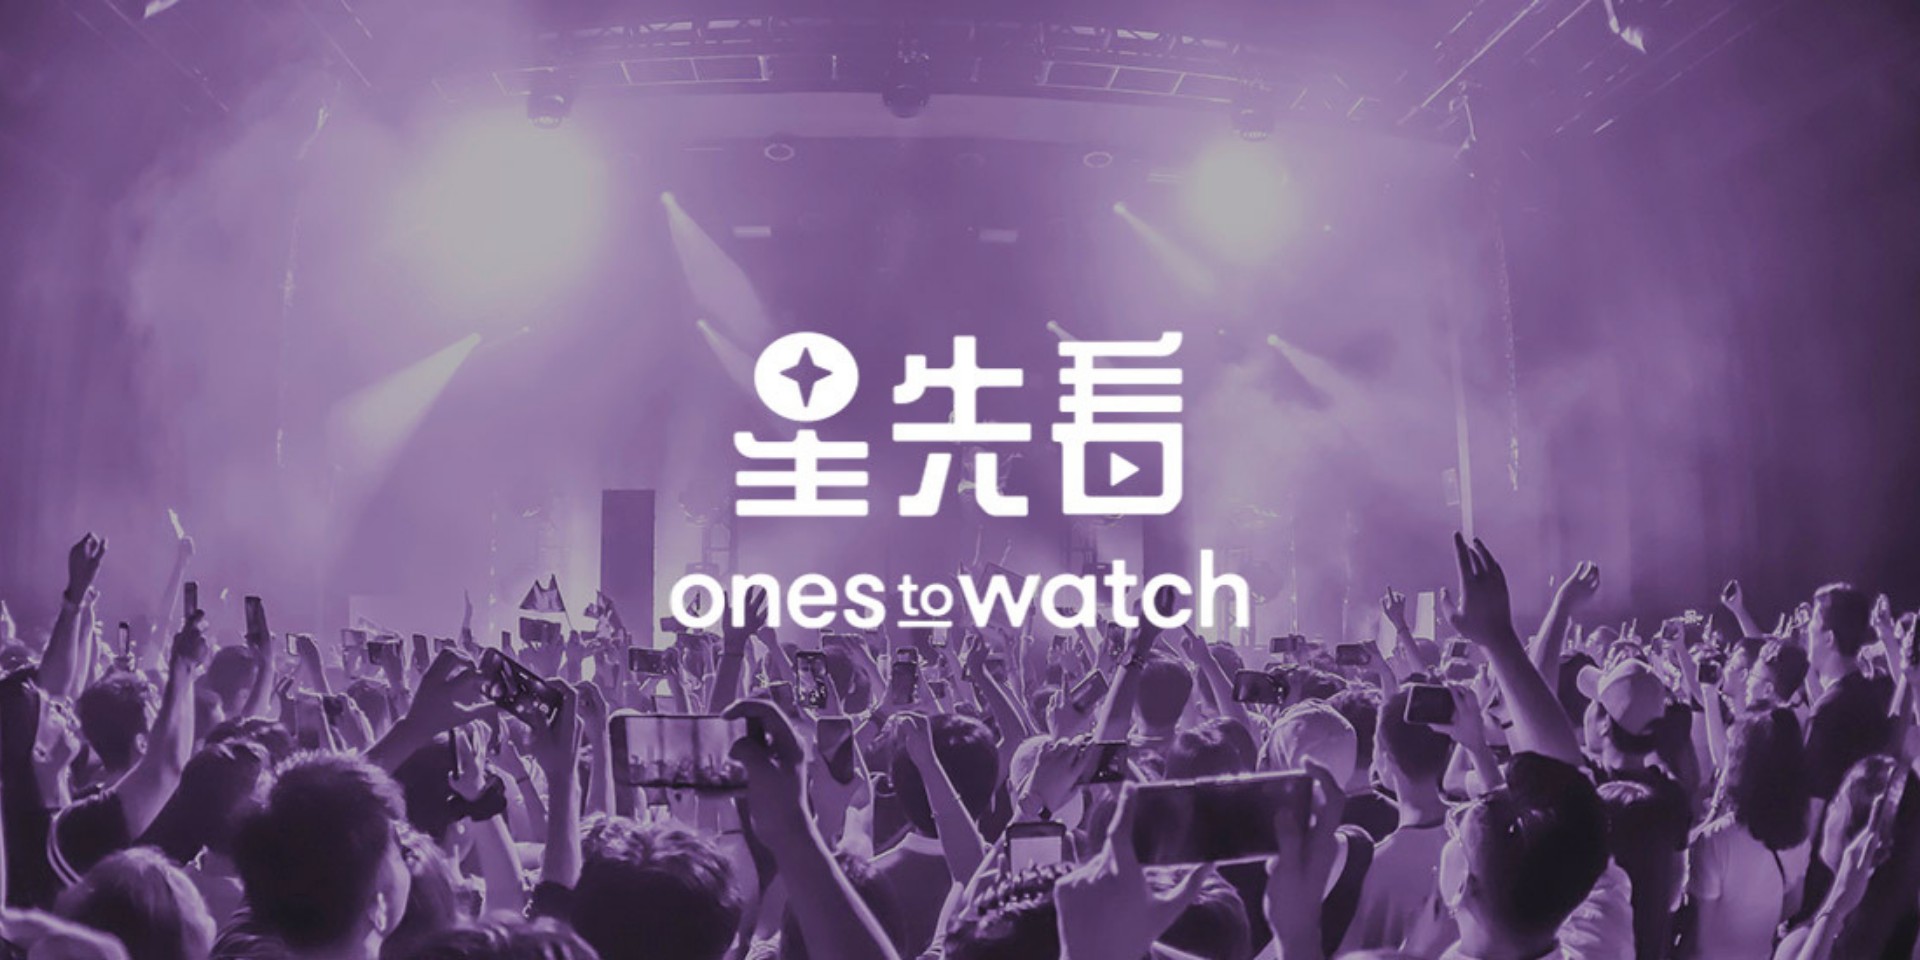 Live Nation to showcase rising talents in China on new online music platform 'Ones To Watch'